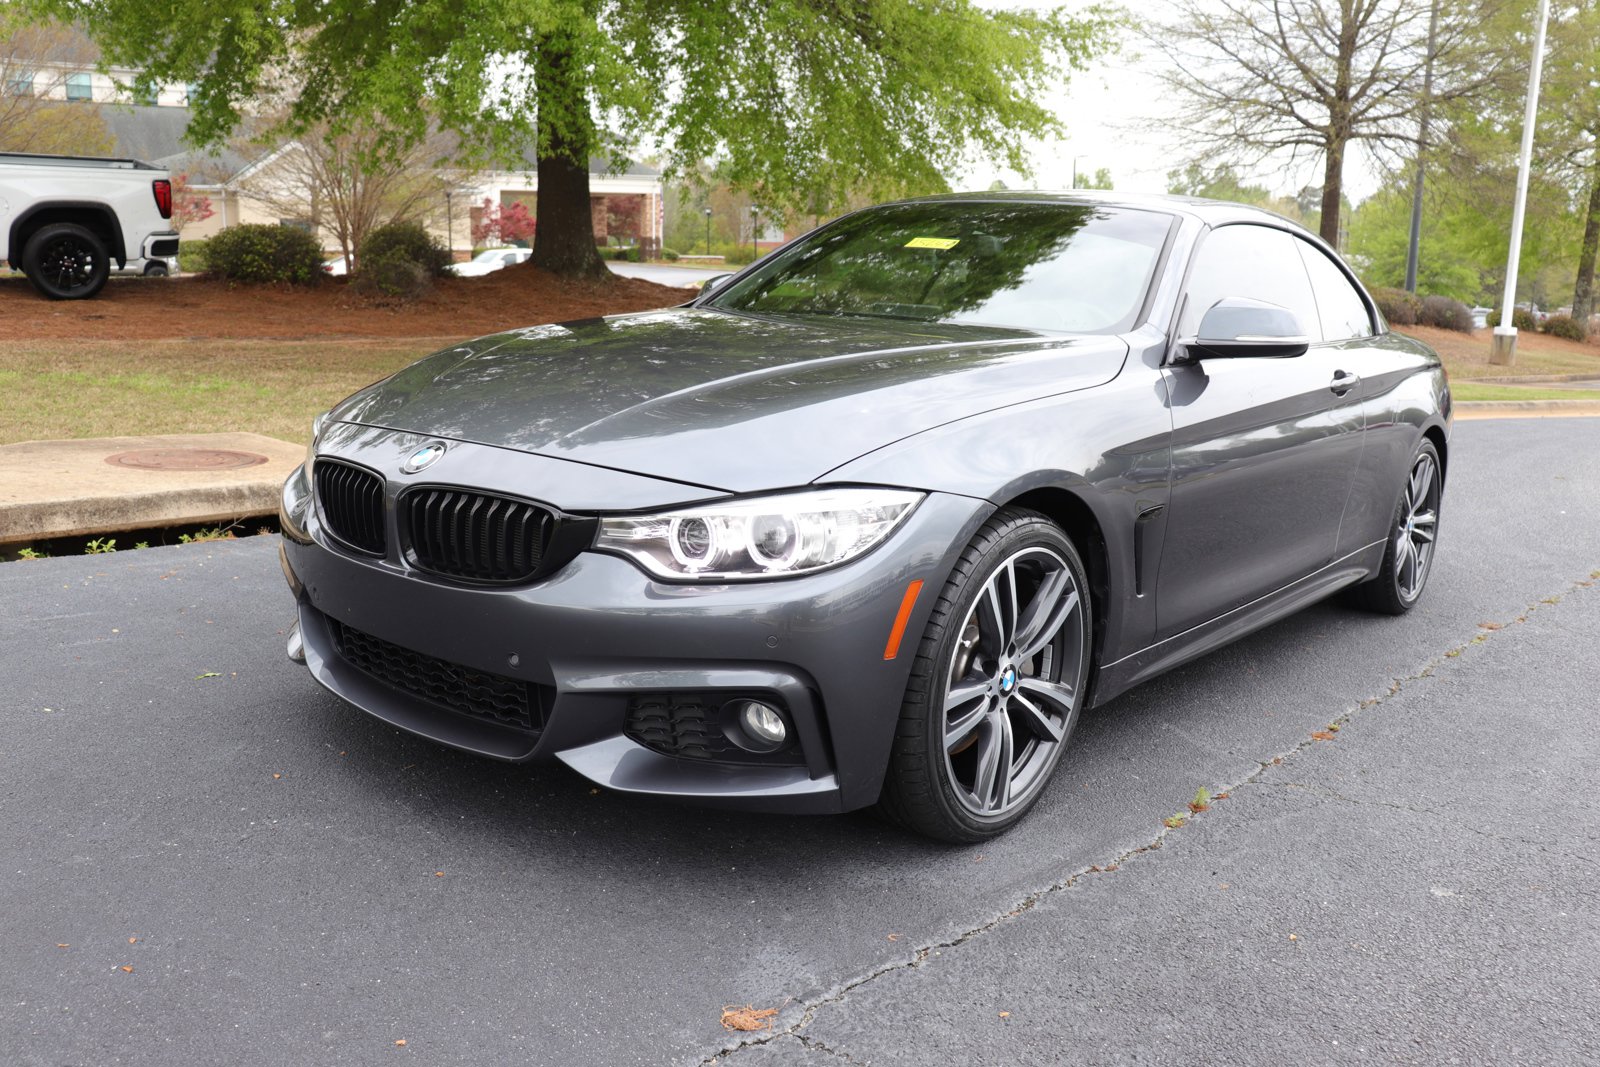 Pre-Owned 2017 BMW 4 Series 440i Convertible For Sale #15645A | Valdosta  Toyota